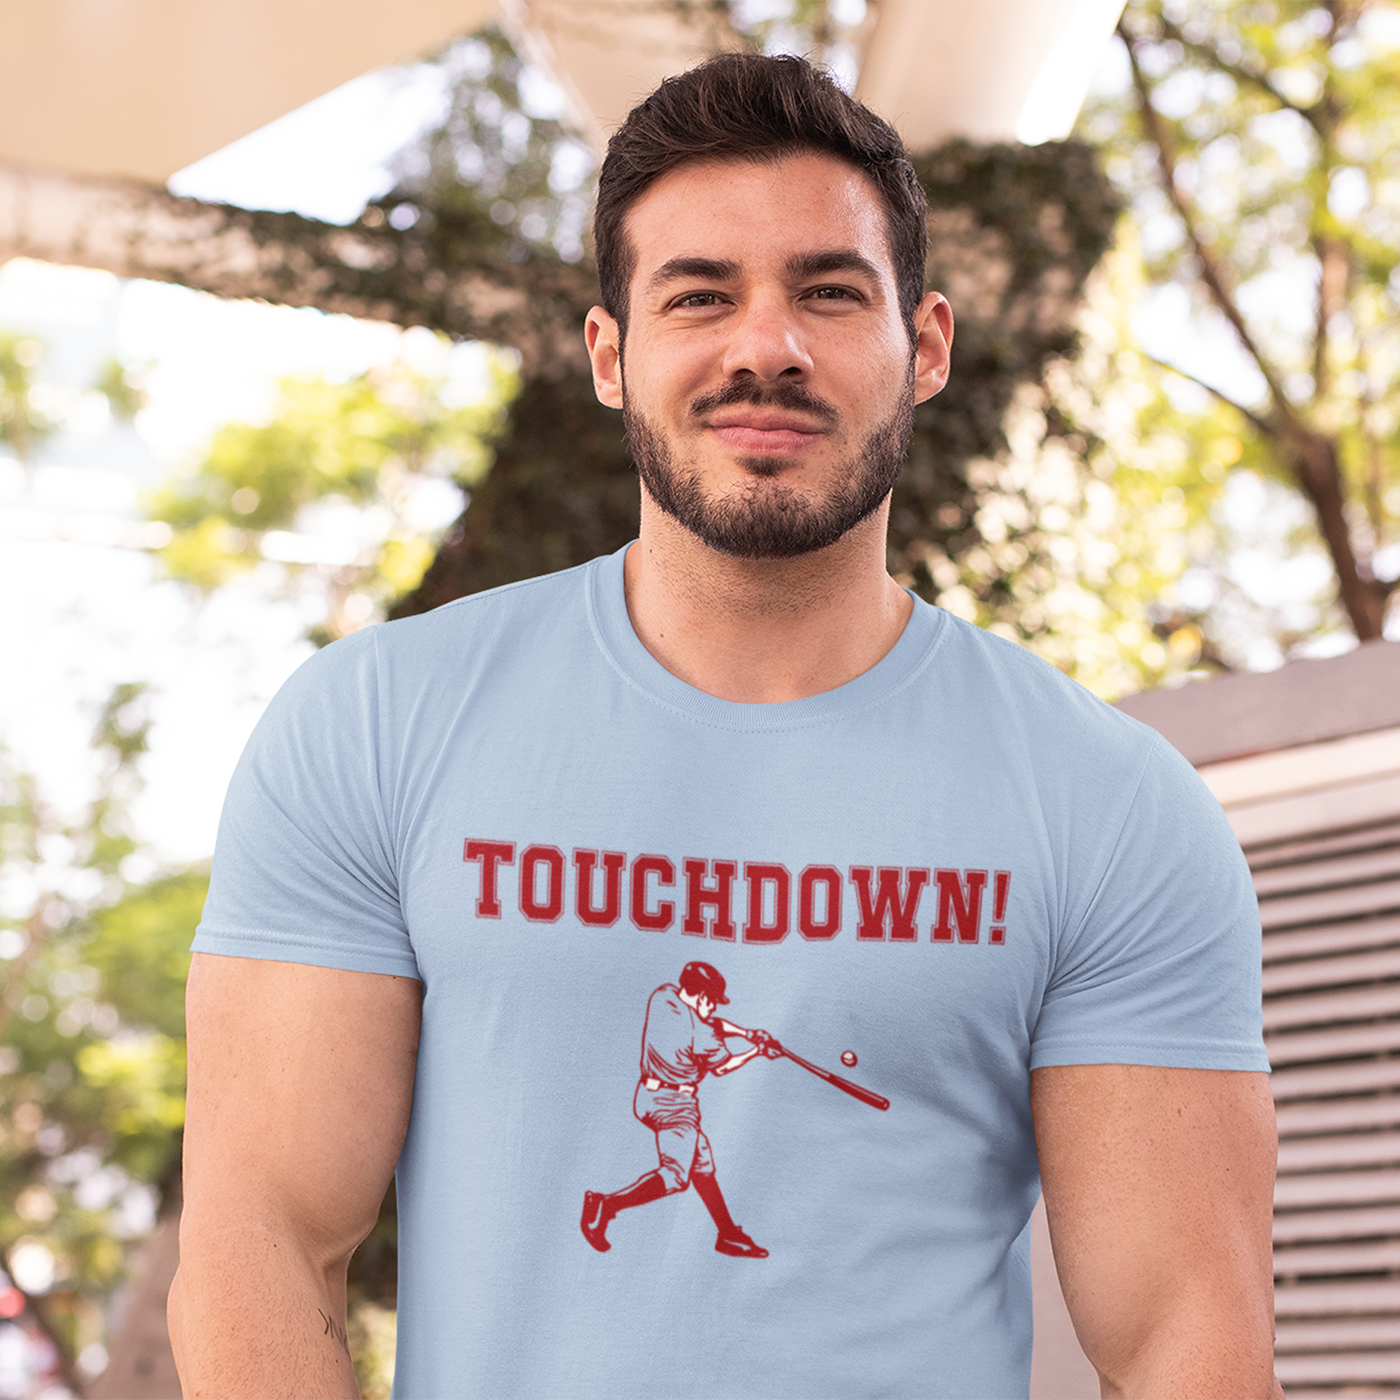 //marionmartigny.com/s/files/1/0274/2488/2766/files/t-shirt-mockup-of-a-muscled-man-smirking-at-the-camera-28517_5000x.png?v=1614348229 5000w,
    //marionmartigny.com/s/files/1/0274/2488/2766/files/t-shirt-mockup-of-a-muscled-man-smirking-at-the-camera-28517_4500x.png?v=1614348229 4500w,
    //marionmartigny.com/s/files/1/0274/2488/2766/files/t-shirt-mockup-of-a-muscled-man-smirking-at-the-camera-28517_4000x.png?v=1614348229 4000w,
    //marionmartigny.com/s/files/1/0274/2488/2766/files/t-shirt-mockup-of-a-muscled-man-smirking-at-the-camera-28517_3500x.png?v=1614348229 3500w,
    //marionmartigny.com/s/files/1/0274/2488/2766/files/t-shirt-mockup-of-a-muscled-man-smirking-at-the-camera-28517_3000x.png?v=1614348229 3000w,
    //marionmartigny.com/s/files/1/0274/2488/2766/files/t-shirt-mockup-of-a-muscled-man-smirking-at-the-camera-28517_2500x.png?v=1614348229 2500w,
    //marionmartigny.com/s/files/1/0274/2488/2766/files/t-shirt-mockup-of-a-muscled-man-smirking-at-the-camera-28517_2000x.png?v=1614348229 2000w,
    //marionmartigny.com/s/files/1/0274/2488/2766/files/t-shirt-mockup-of-a-muscled-man-smirking-at-the-camera-28517_1800x.png?v=1614348229 1800w,
    //marionmartigny.com/s/files/1/0274/2488/2766/files/t-shirt-mockup-of-a-muscled-man-smirking-at-the-camera-28517_1600x.png?v=1614348229 1600w,
    //marionmartigny.com/s/files/1/0274/2488/2766/files/t-shirt-mockup-of-a-muscled-man-smirking-at-the-camera-28517_1400x.png?v=1614348229 1400w,
    //marionmartigny.com/s/files/1/0274/2488/2766/files/t-shirt-mockup-of-a-muscled-man-smirking-at-the-camera-28517_1200x.png?v=1614348229 1200w,
    //marionmartigny.com/s/files/1/0274/2488/2766/files/t-shirt-mockup-of-a-muscled-man-smirking-at-the-camera-28517_1000x.png?v=1614348229 1000w,
    //marionmartigny.com/s/files/1/0274/2488/2766/files/t-shirt-mockup-of-a-muscled-man-smirking-at-the-camera-28517_800x.png?v=1614348229 800w,
    //marionmartigny.com/s/files/1/0274/2488/2766/files/t-shirt-mockup-of-a-muscled-man-smirking-at-the-camera-28517_600x.png?v=1614348229 600w,
    //marionmartigny.com/s/files/1/0274/2488/2766/files/t-shirt-mockup-of-a-muscled-man-smirking-at-the-camera-28517_400x.png?v=1614348229 400w,
    //marionmartigny.com/s/files/1/0274/2488/2766/files/t-shirt-mockup-of-a-muscled-man-smirking-at-the-camera-28517_200x.png?v=1614348229 200w